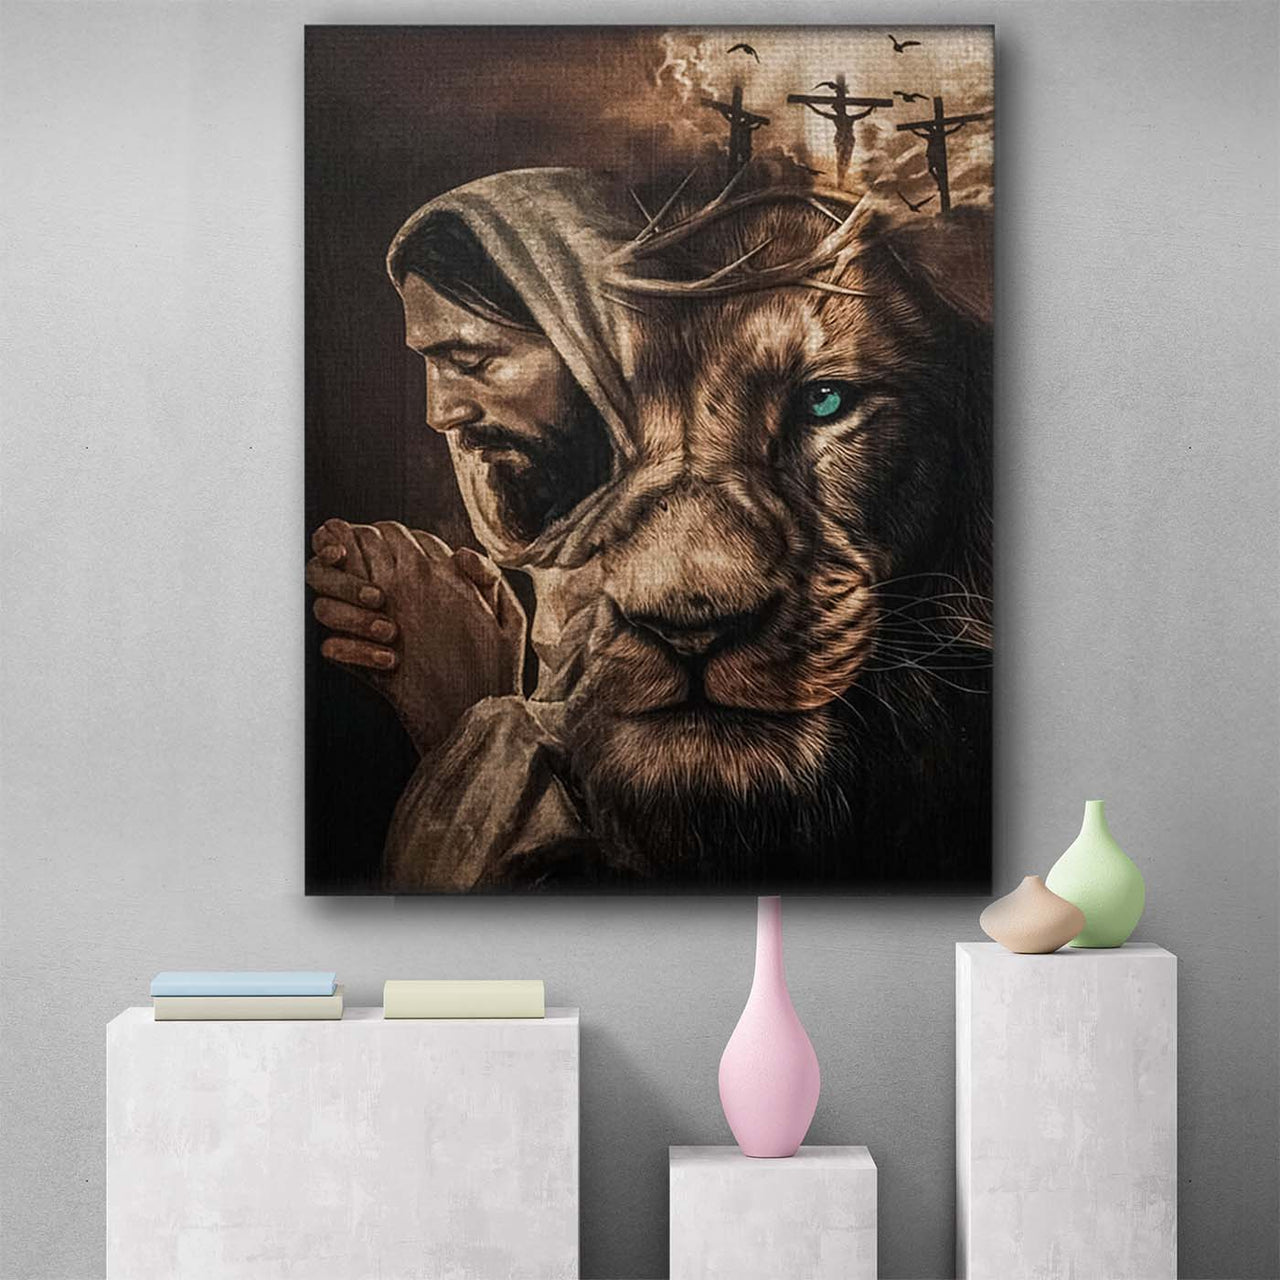 Christian Jesus God And Lion Wall Art Decor Poster Canvas